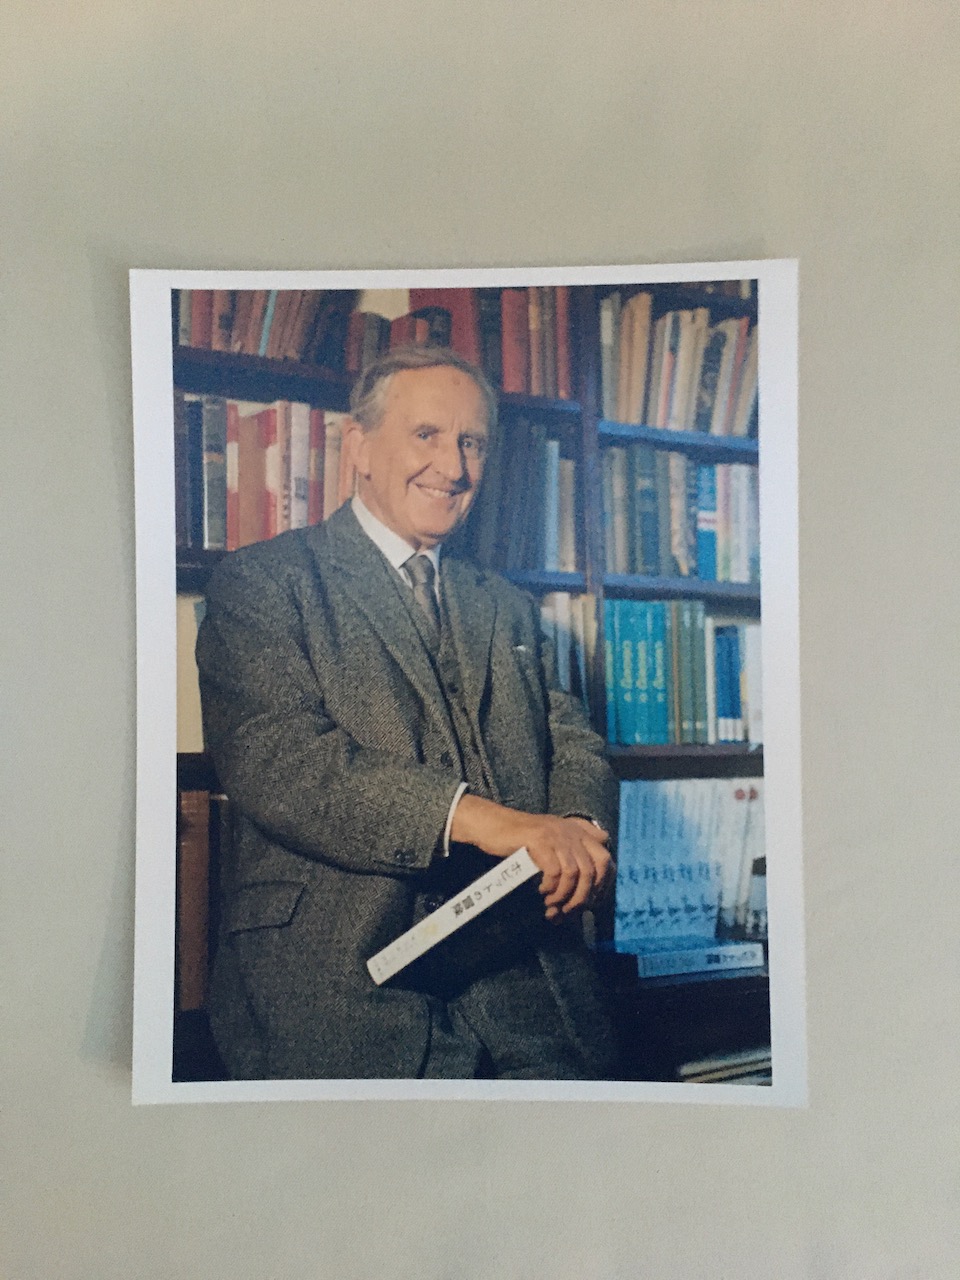 Exclusive Photographic Print: J. R. R. Tolkien in His Library